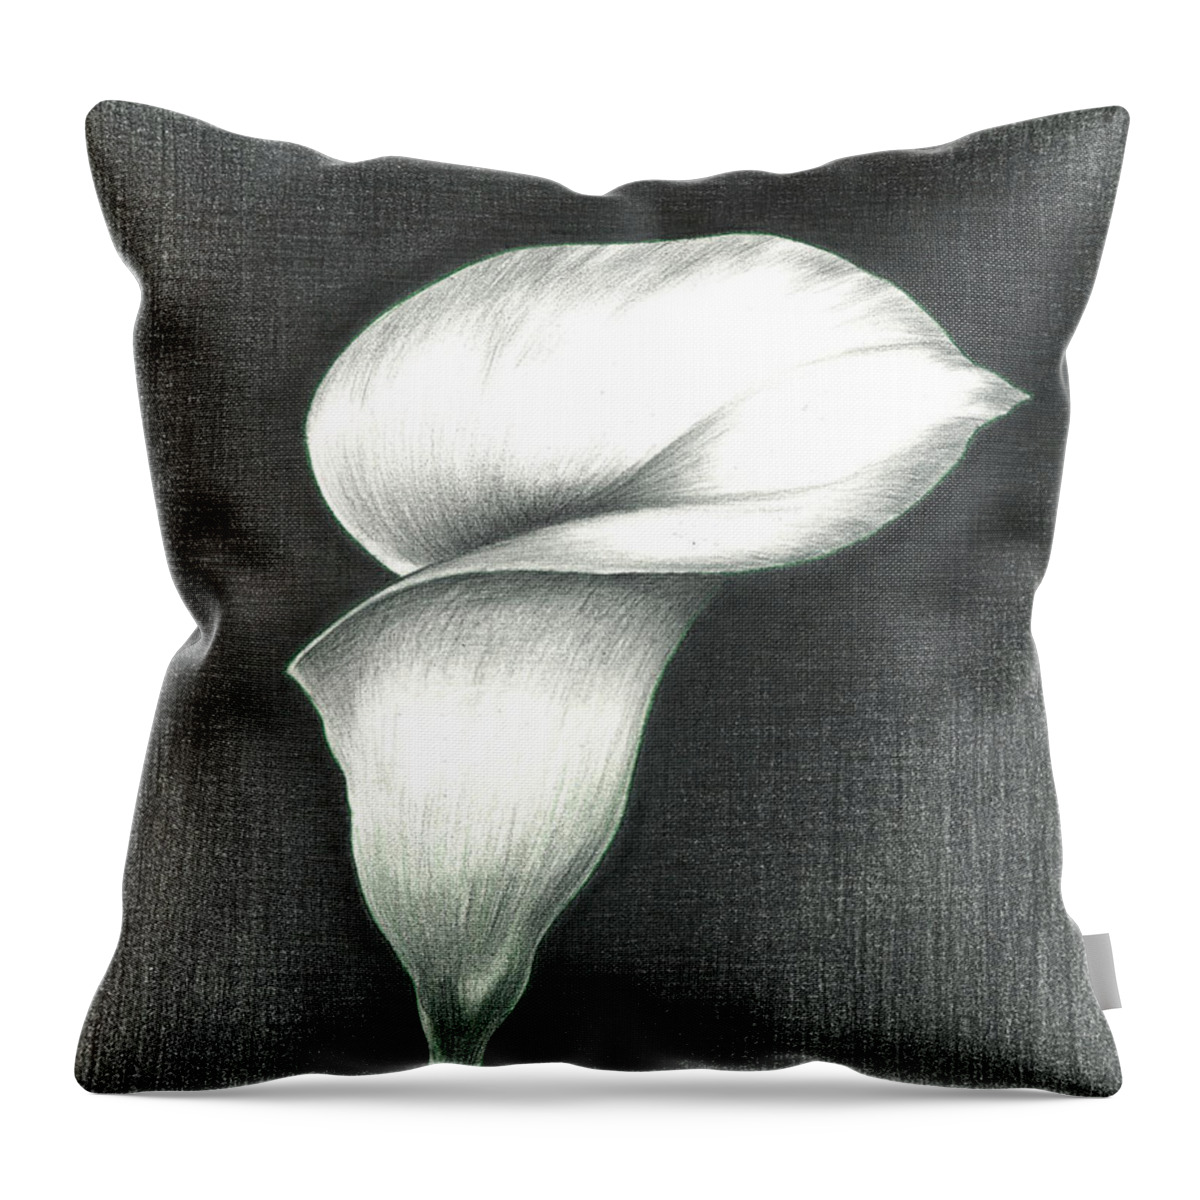 Calla Lily Throw Pillow featuring the photograph Calla Lily by Troy Levesque